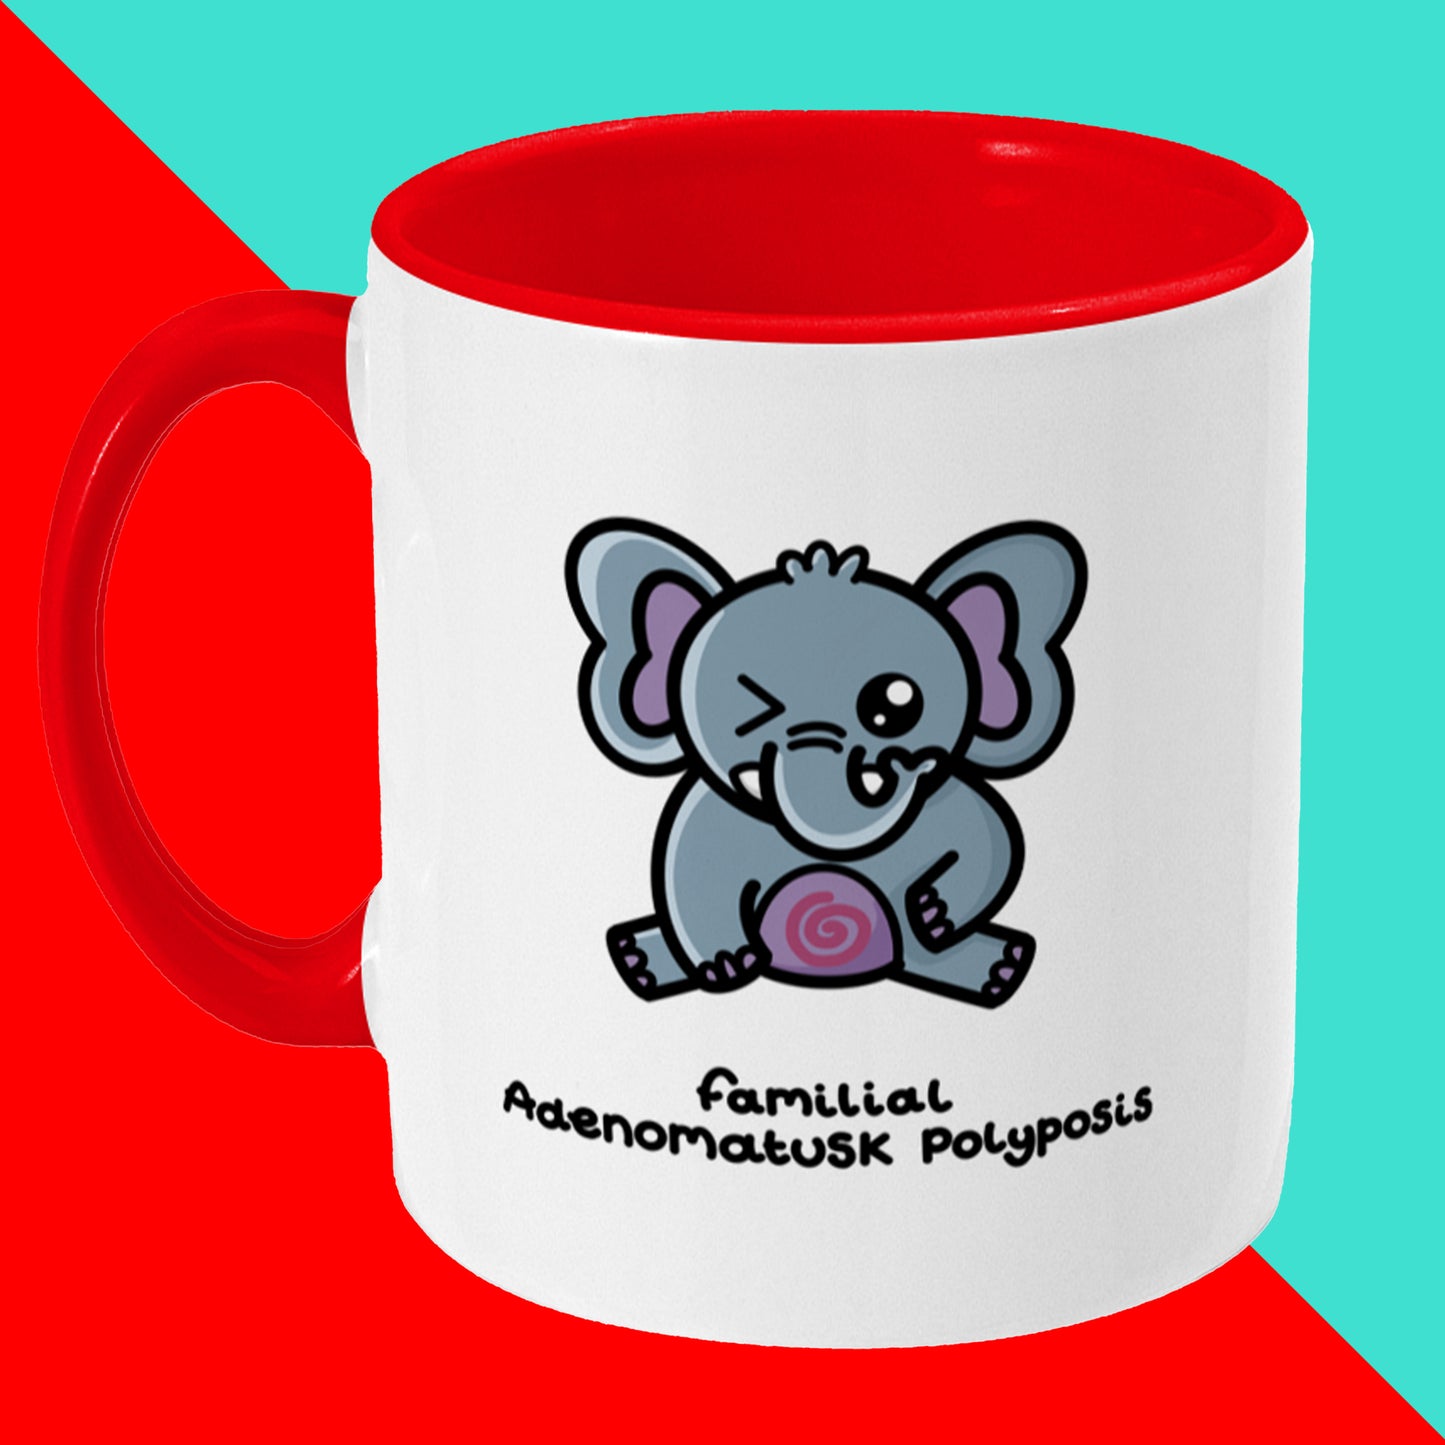 a white mug with red inside the mug and a red handle with a cute elephant illustration on the front. The elephant is sat on it's back legs and has one eye shut. The elephant has a red spiral on it's tummy and is holding it's tummy. 'familial adenomatusk polyposis' is written underneath.